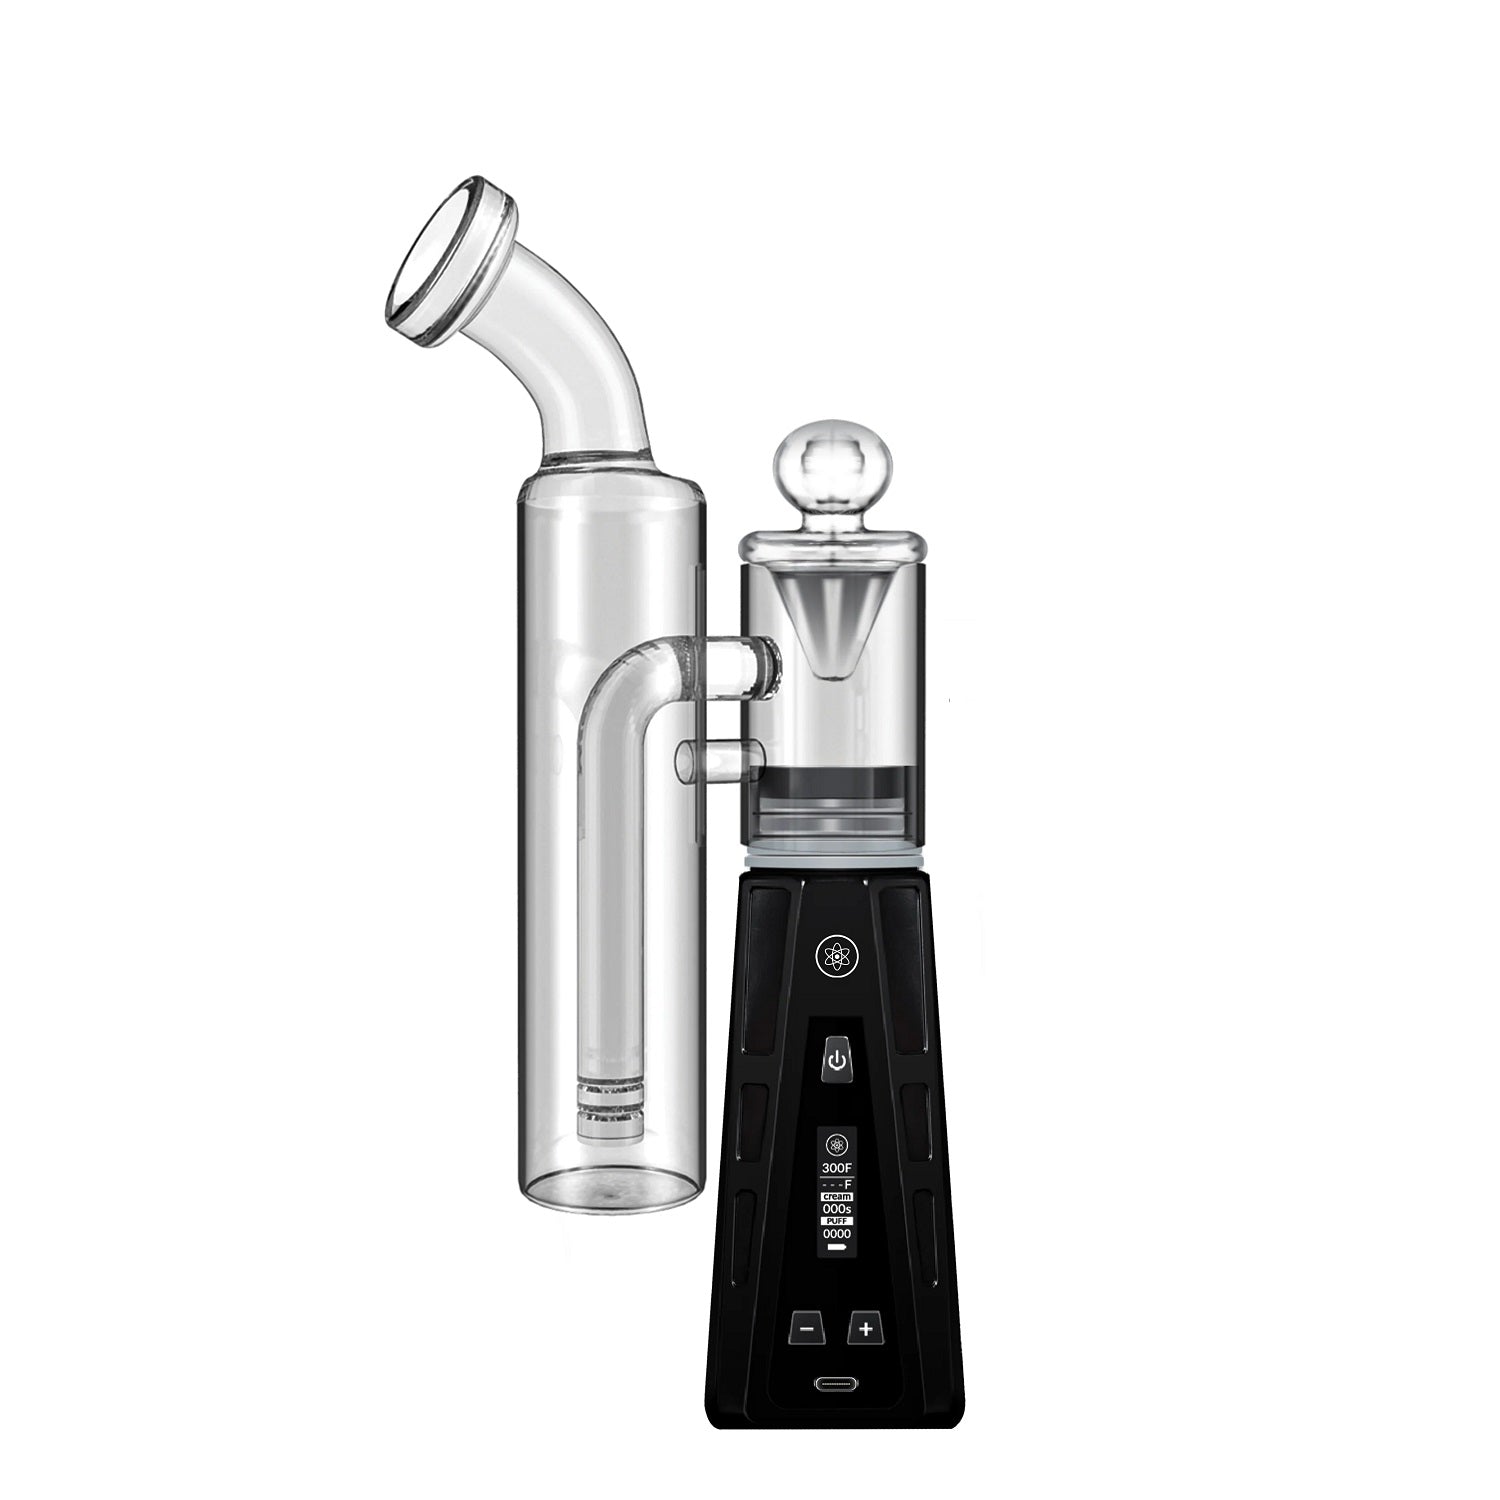 DabTech Elite Plus Electric Dab Rig for Concentrates - Puffer Cloud The World's Best Online Smoke Shop and Head Shop